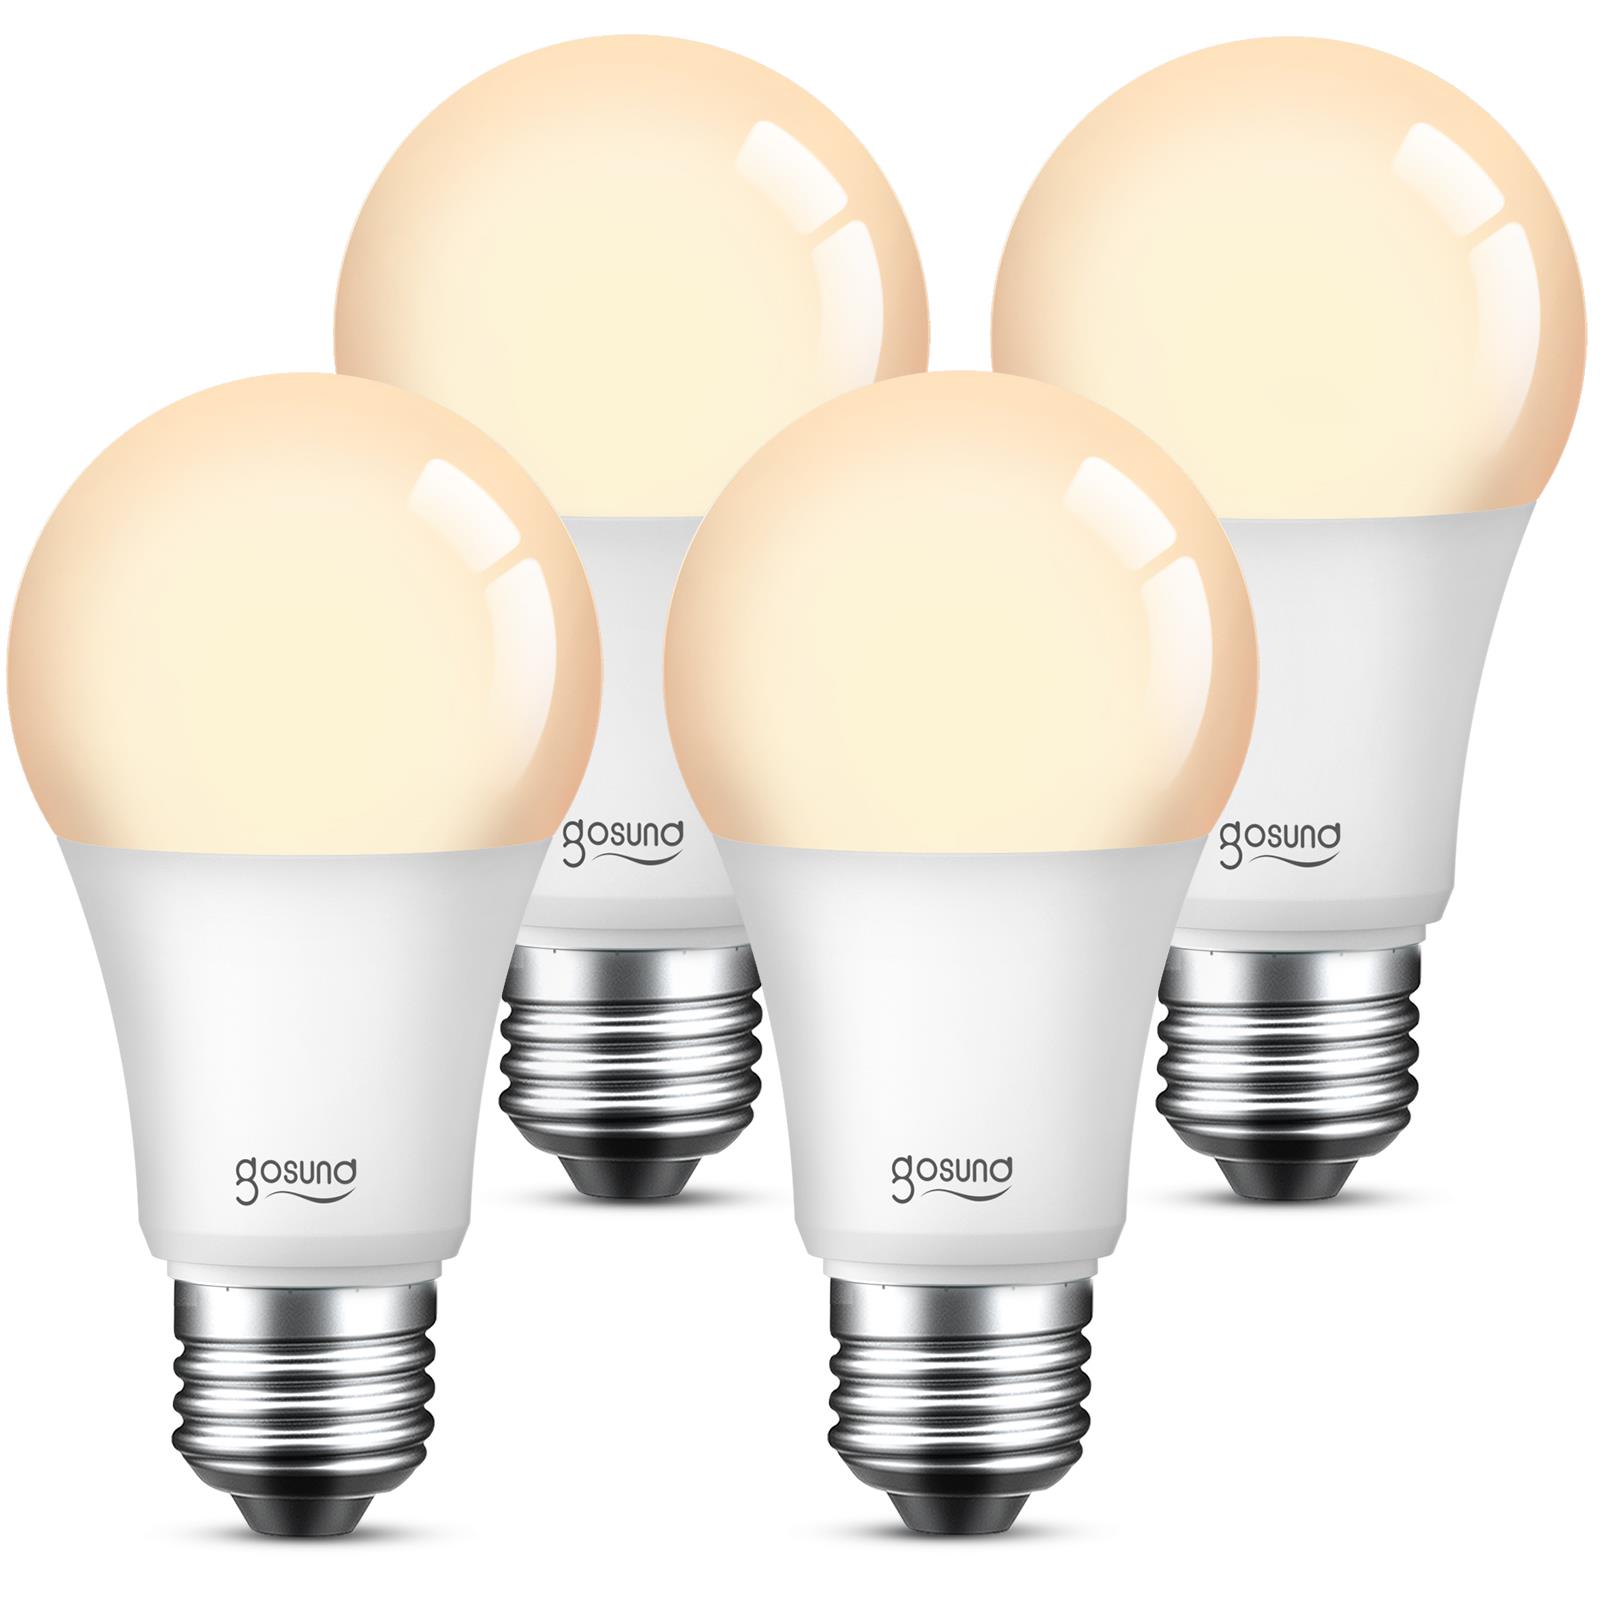 Oxideren toernooi strategie Gosund Smart Bulb A19 Cool White E26 Dimmable LED Light Bulb in the General  Purpose LED Light Bulbs department at Lowes.com